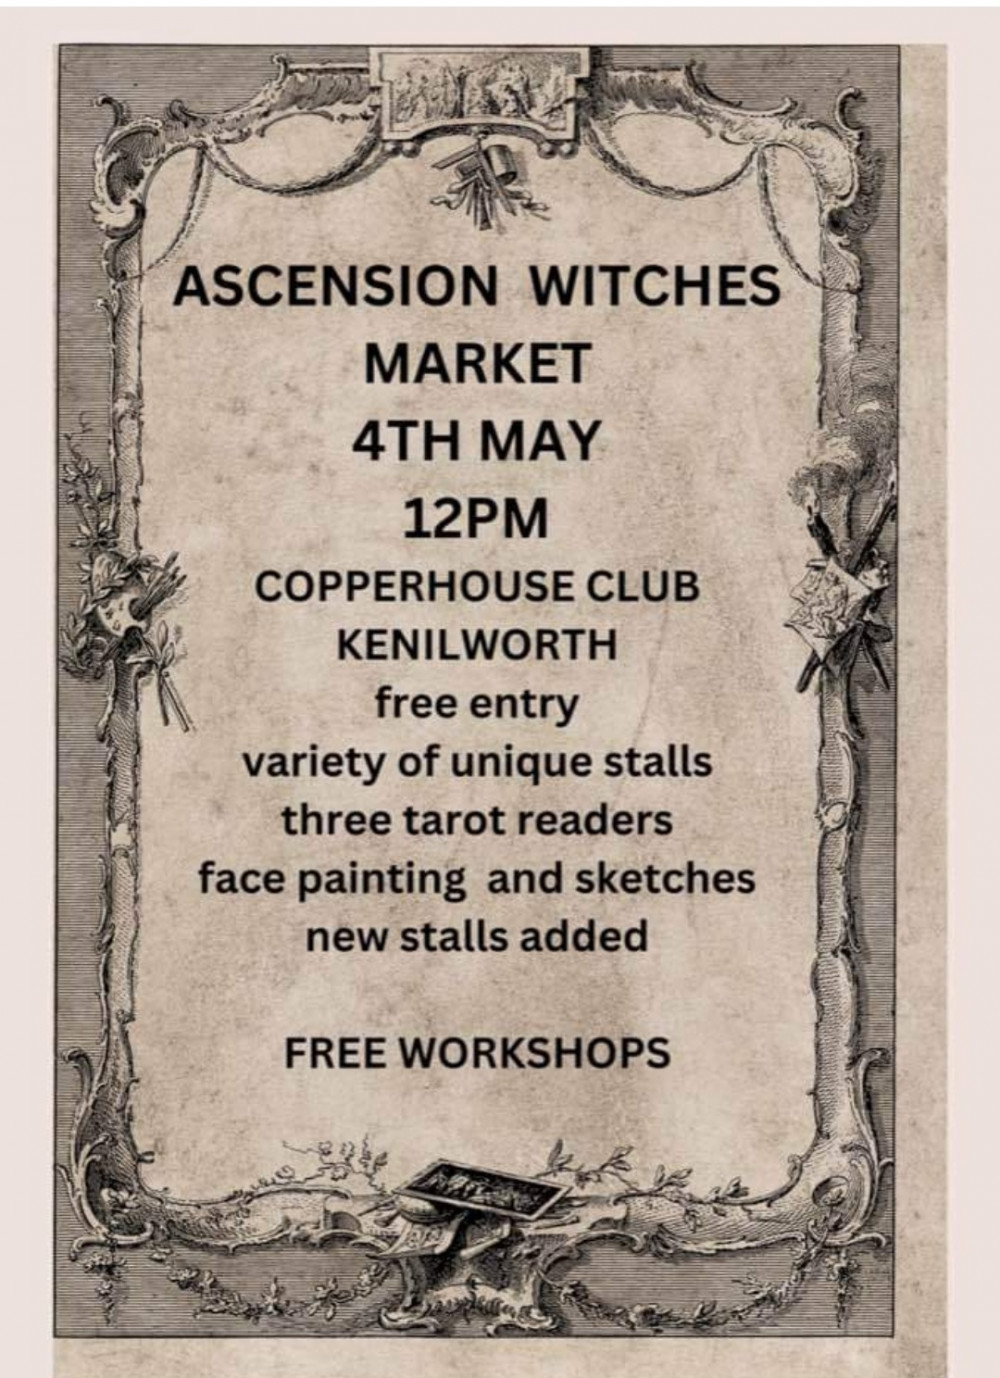 Ascension witches market 